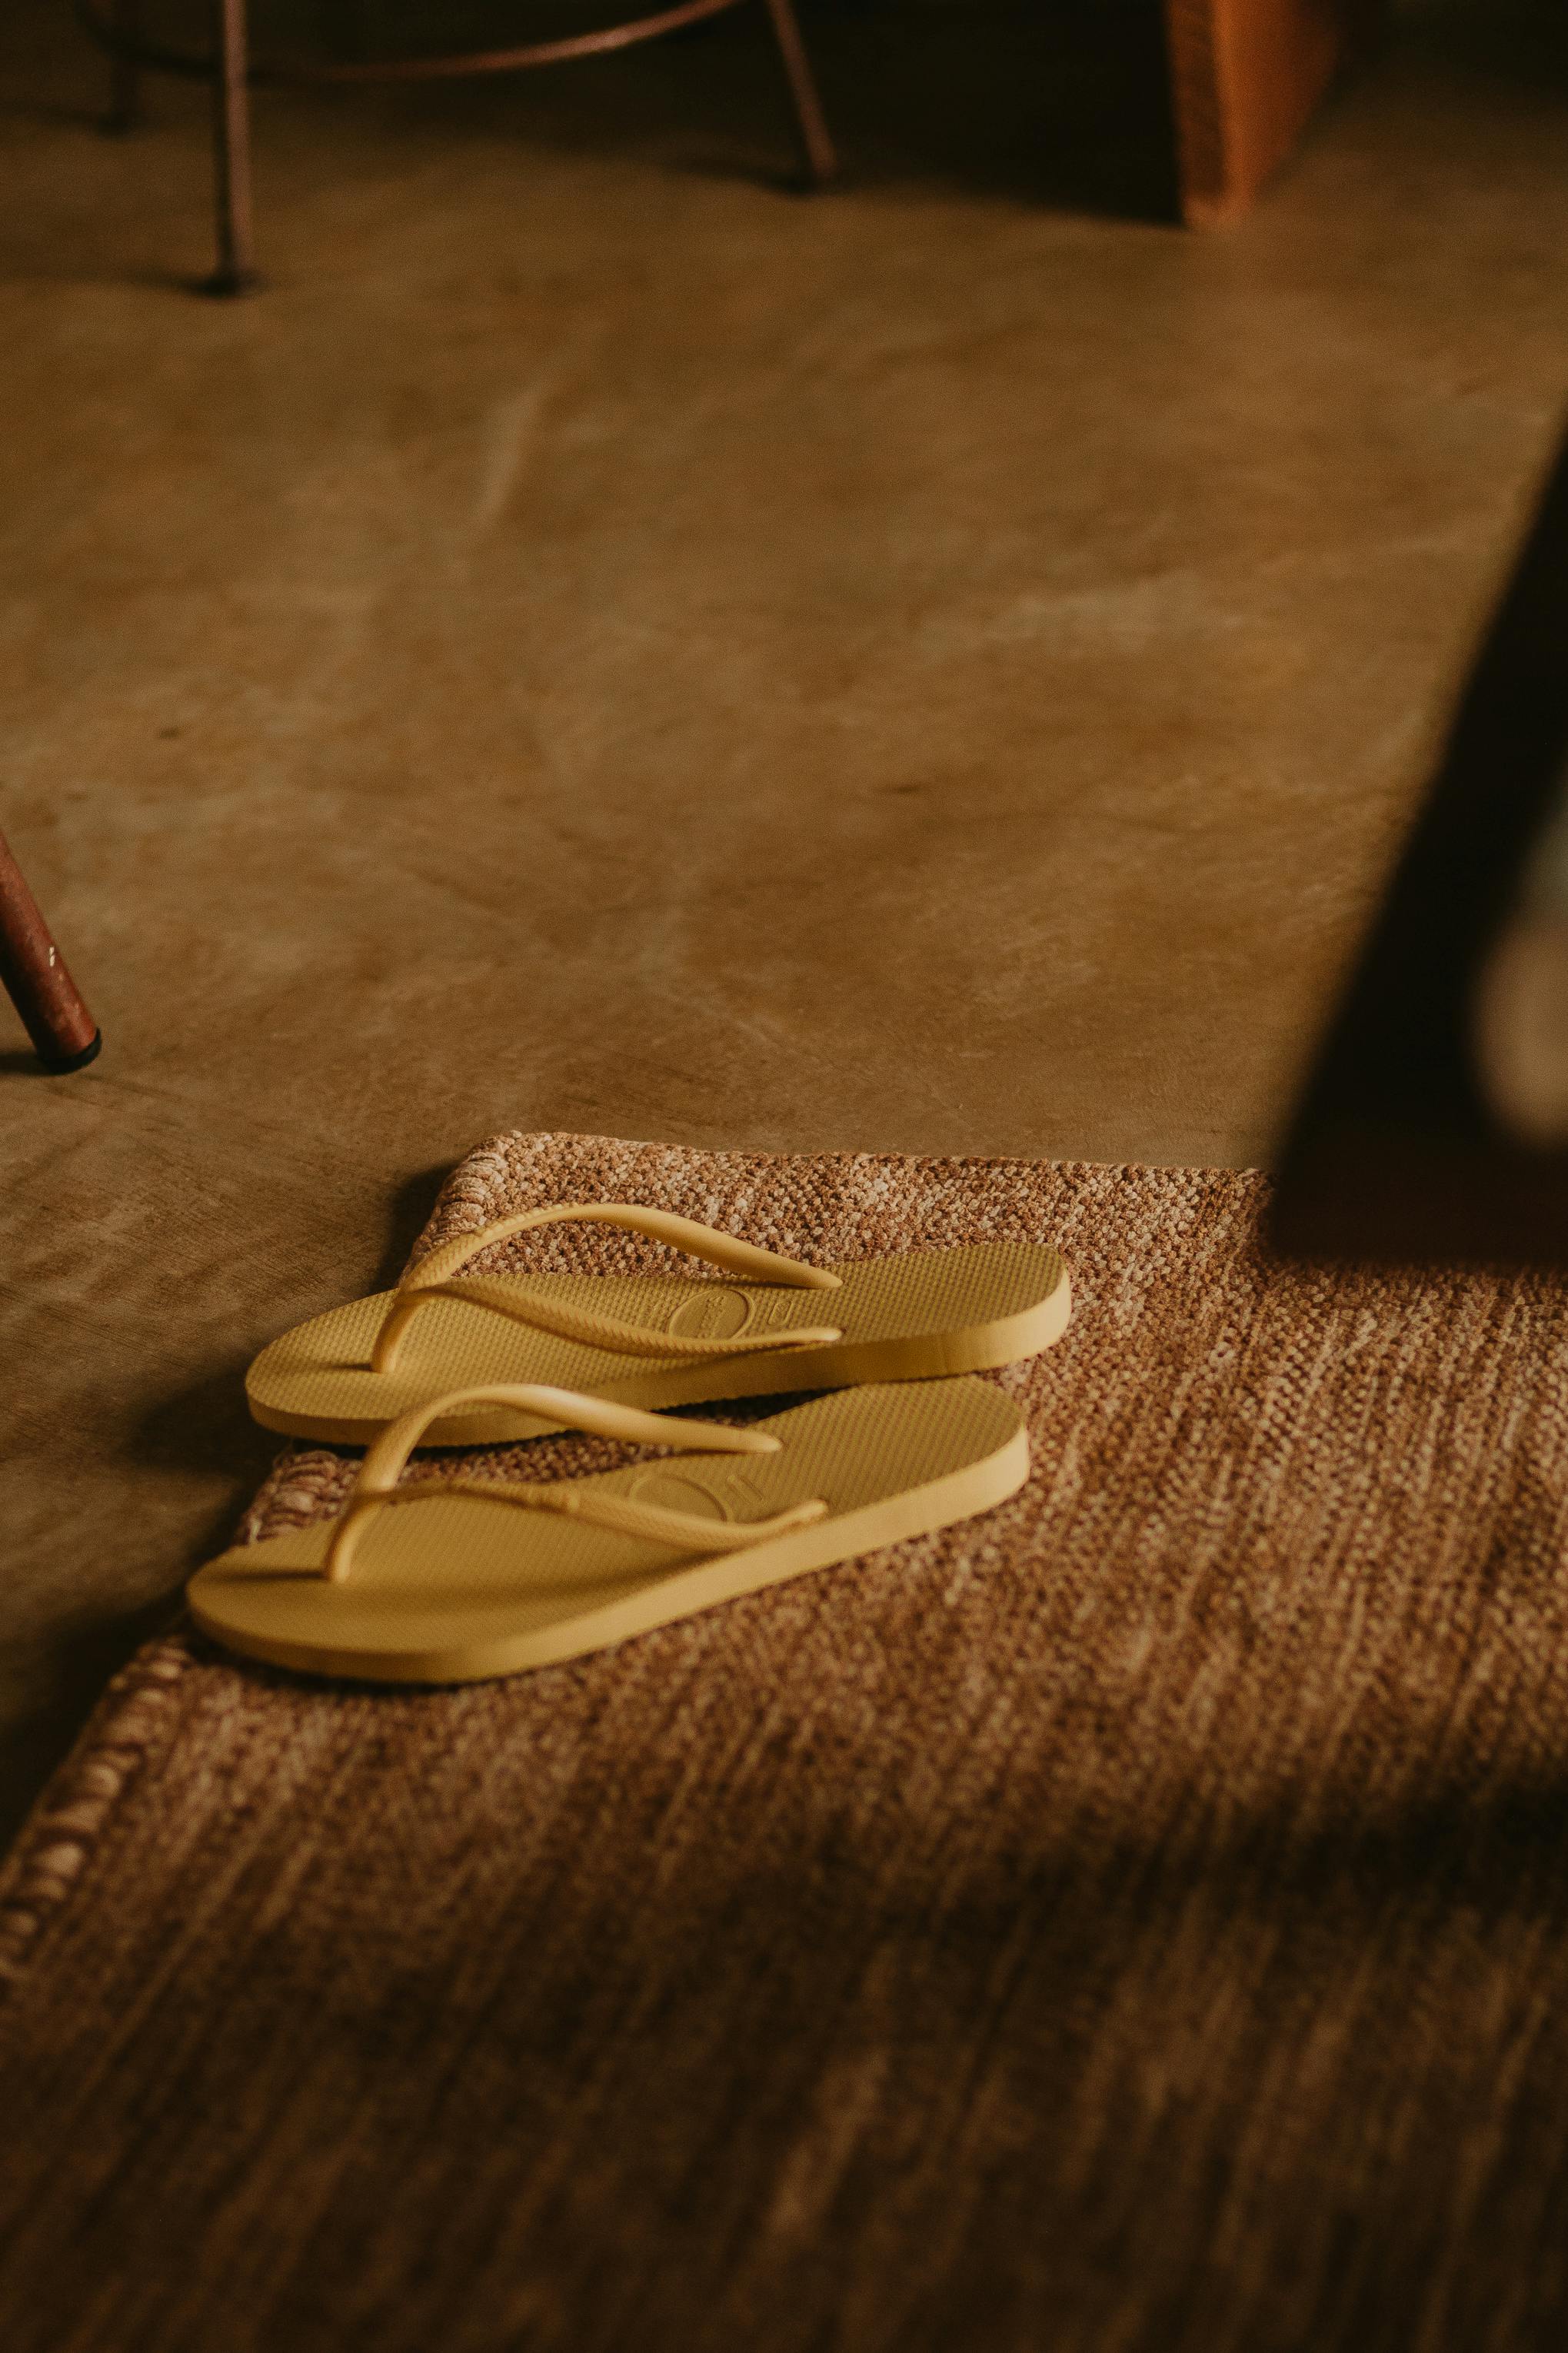 Flip Flops Slippers on a Mat · Free Stock Photo